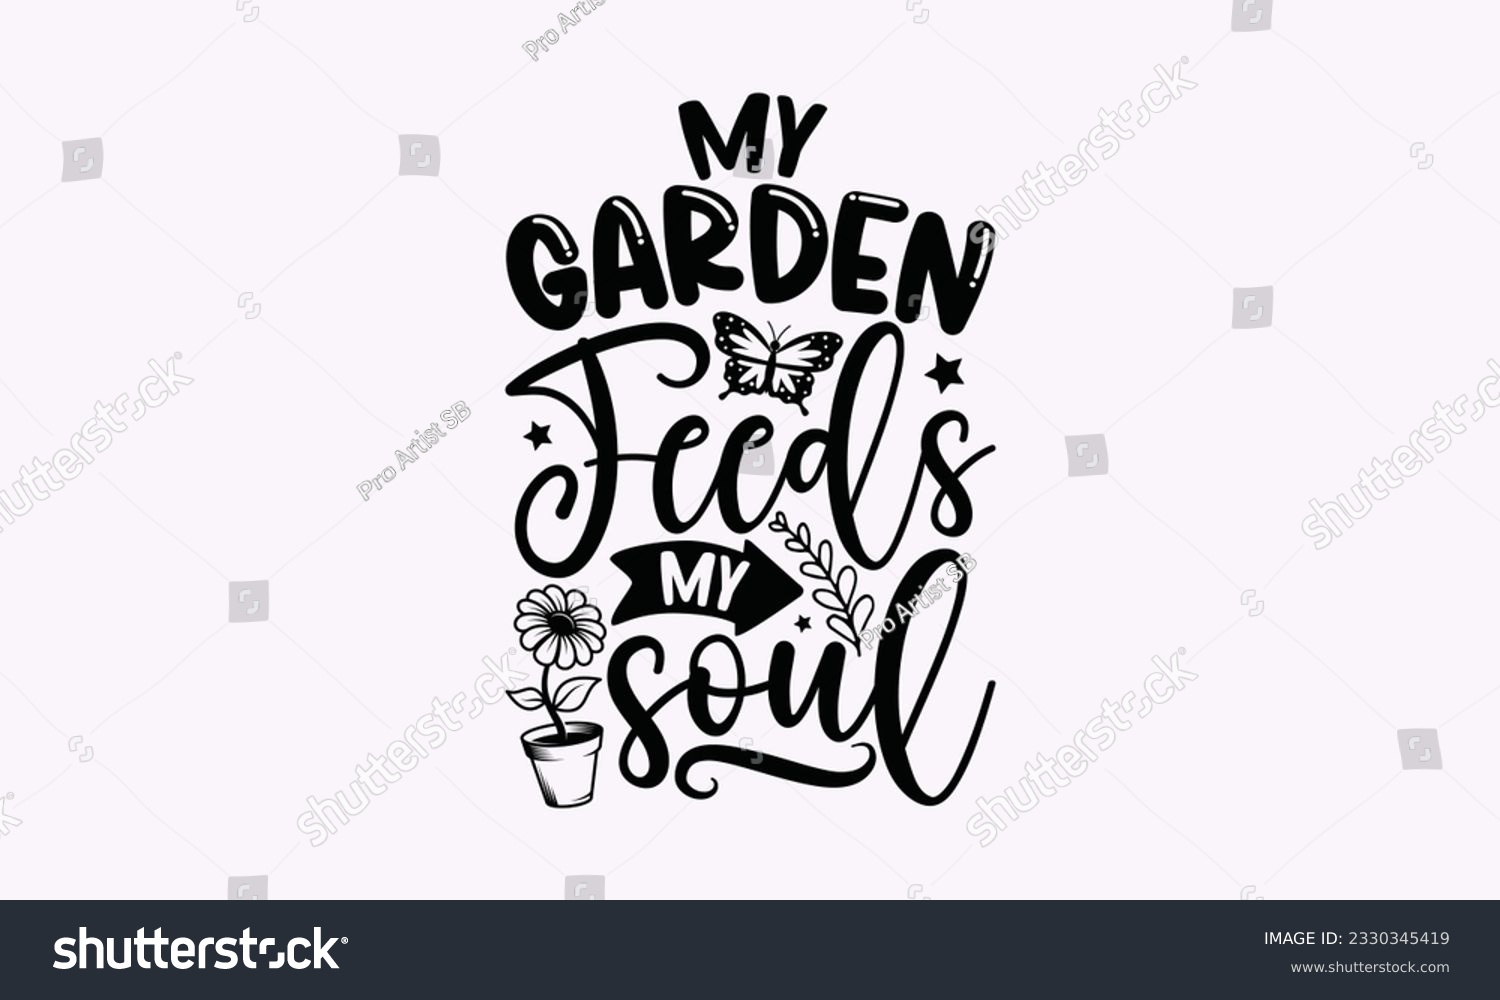 SVG of My garden feeds my soul - Gardening SVG Design, Flower Quotes, Calligraphy graphic design, Typography poster with old style camera and quote. svg